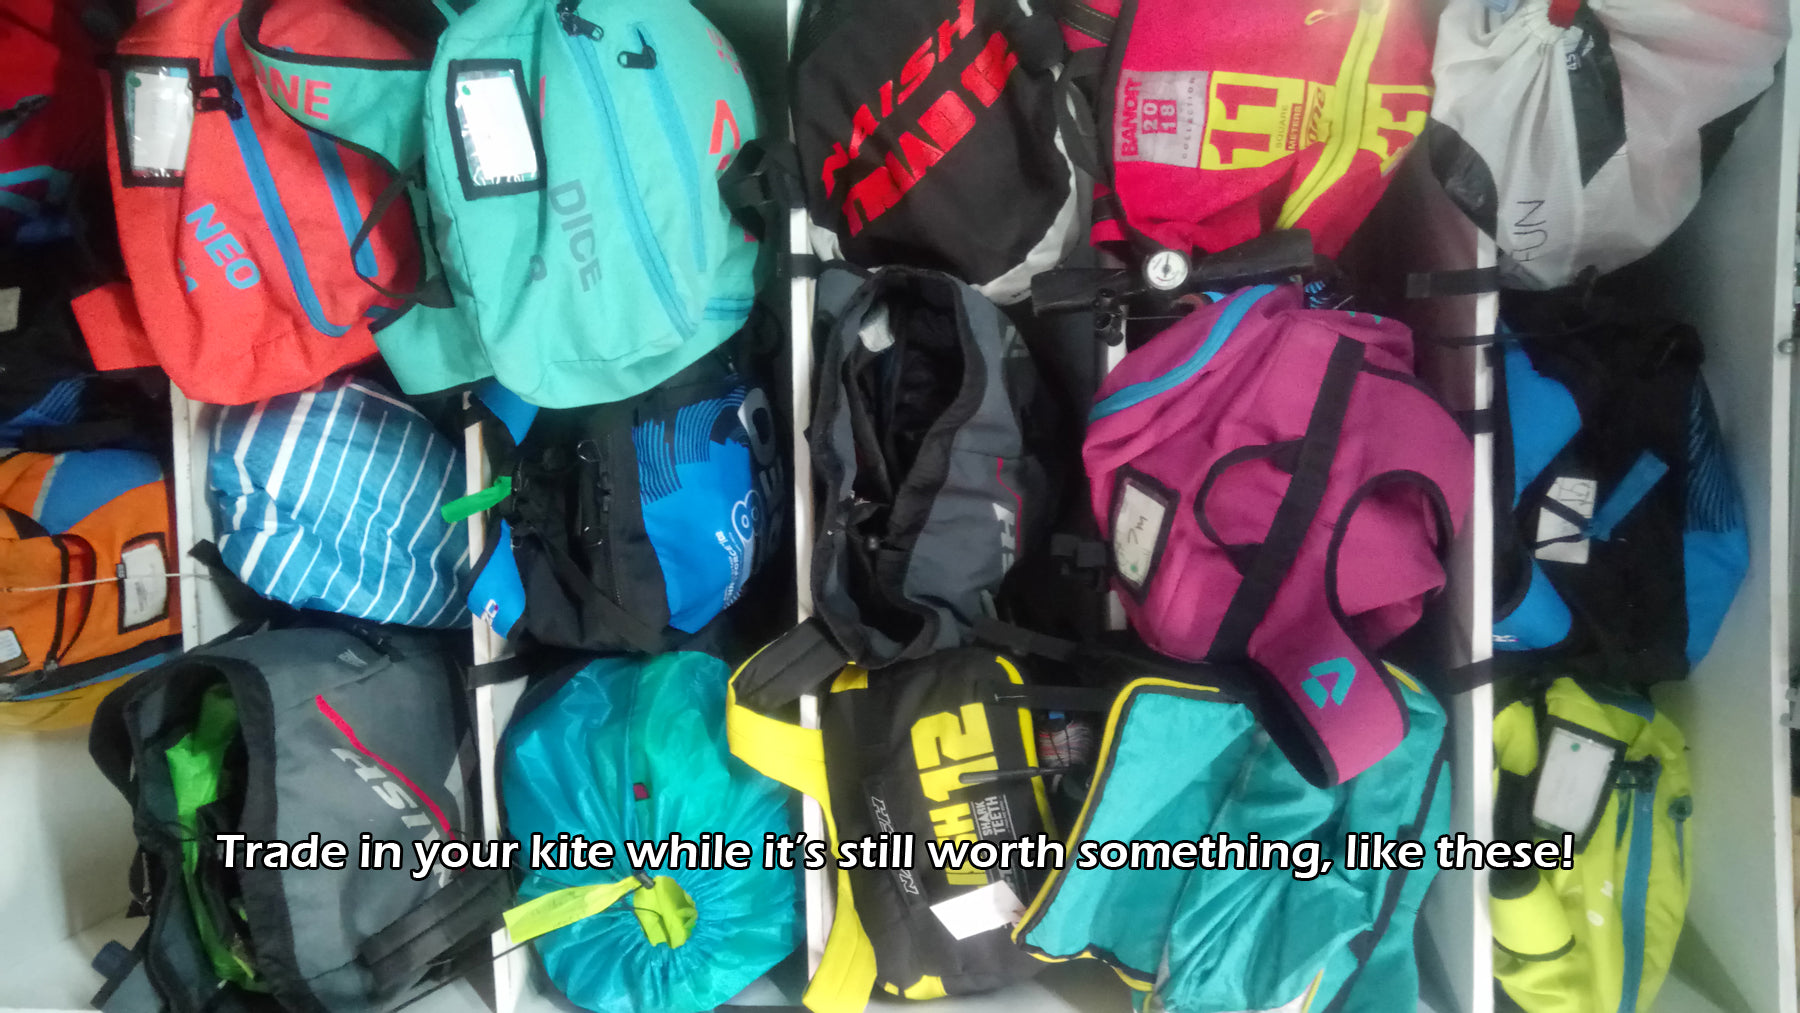 Trade in kitesurfing equipment while it's still worth something second hand